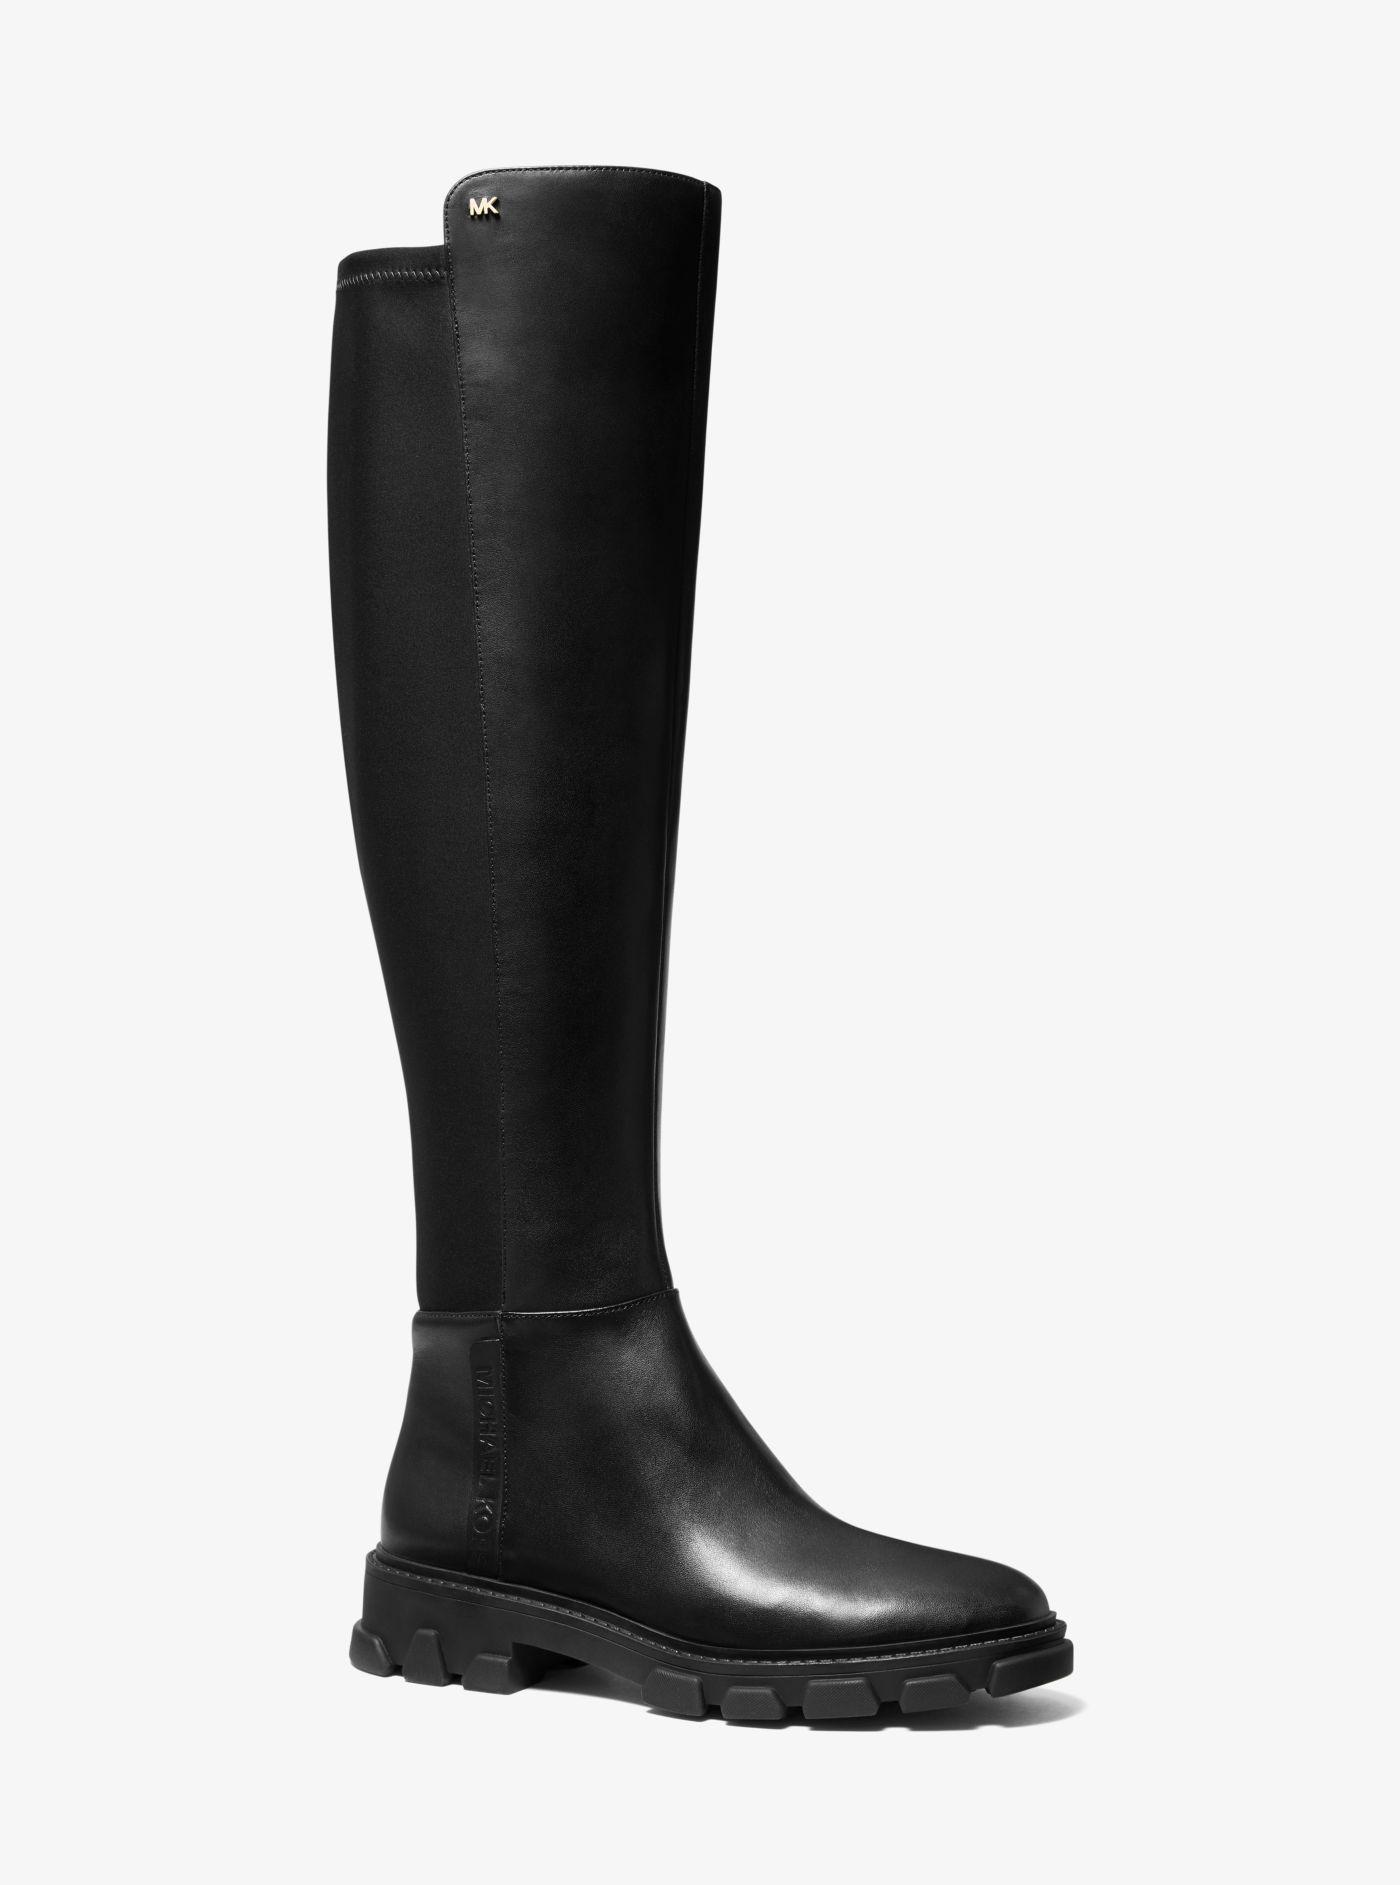 Michael Kors Ridley Leather Boot in Black | Lyst